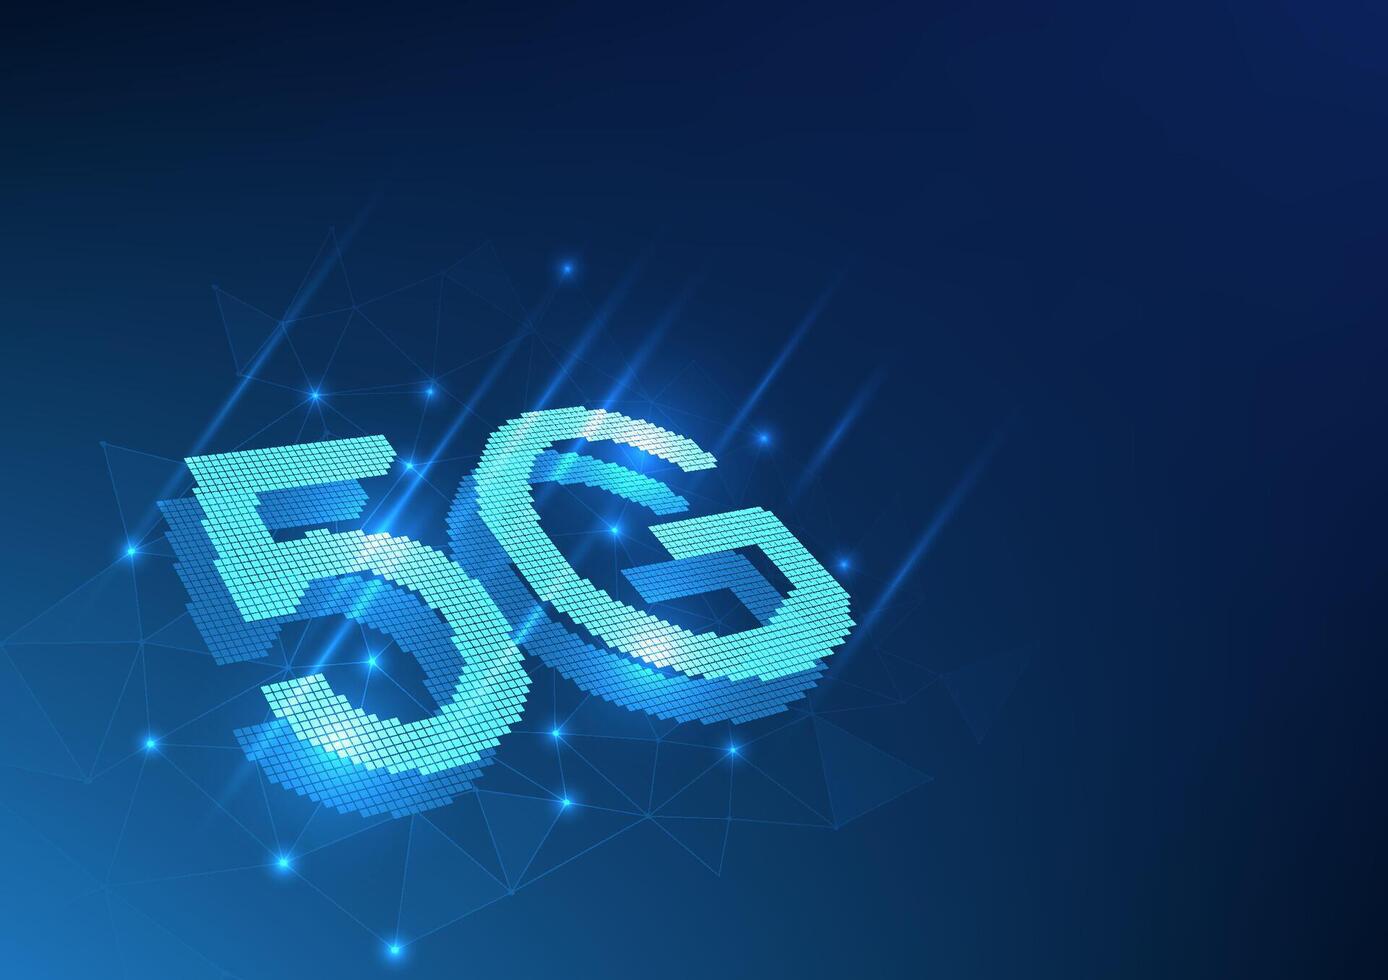 Telecommunications technology The 5G signal behind it is an interconnected network with lights, demonstrating the development of advanced communication networks to distribute signals across the world. vector